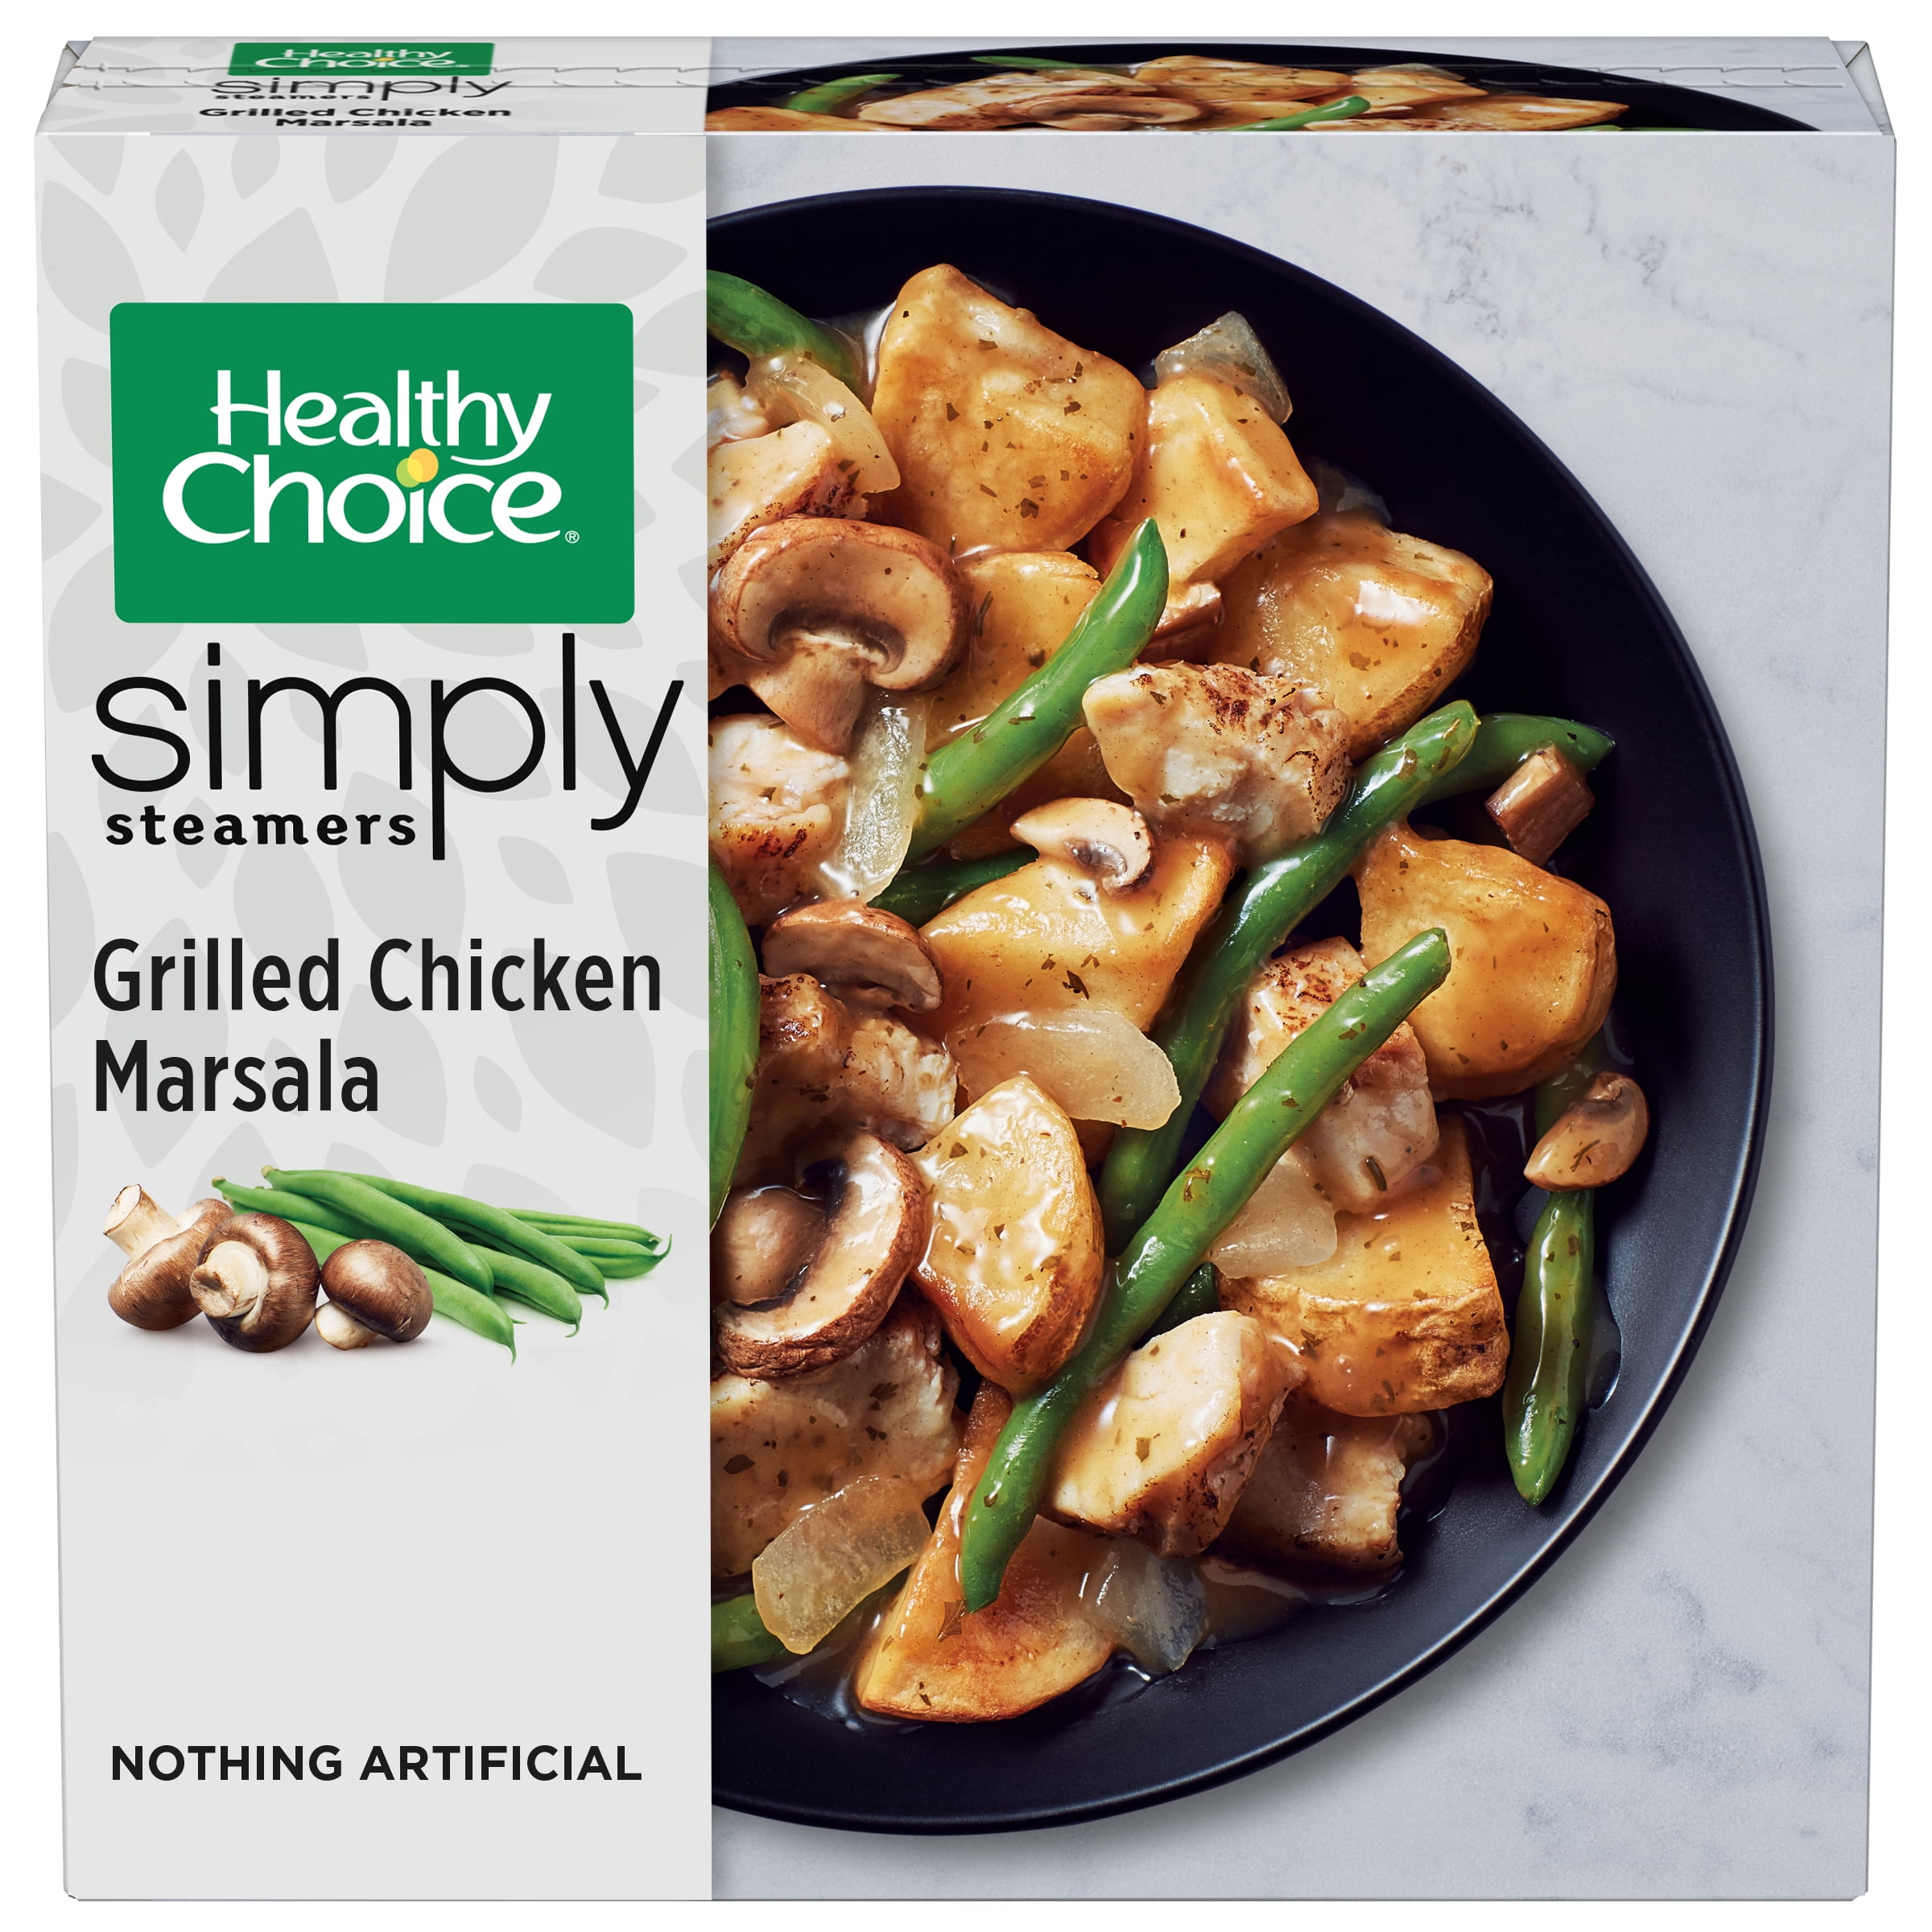 Healthy Choice Simply Steamers Grilled Chicken Marsala Frozen Meal, 9.9 oz (Frozen)